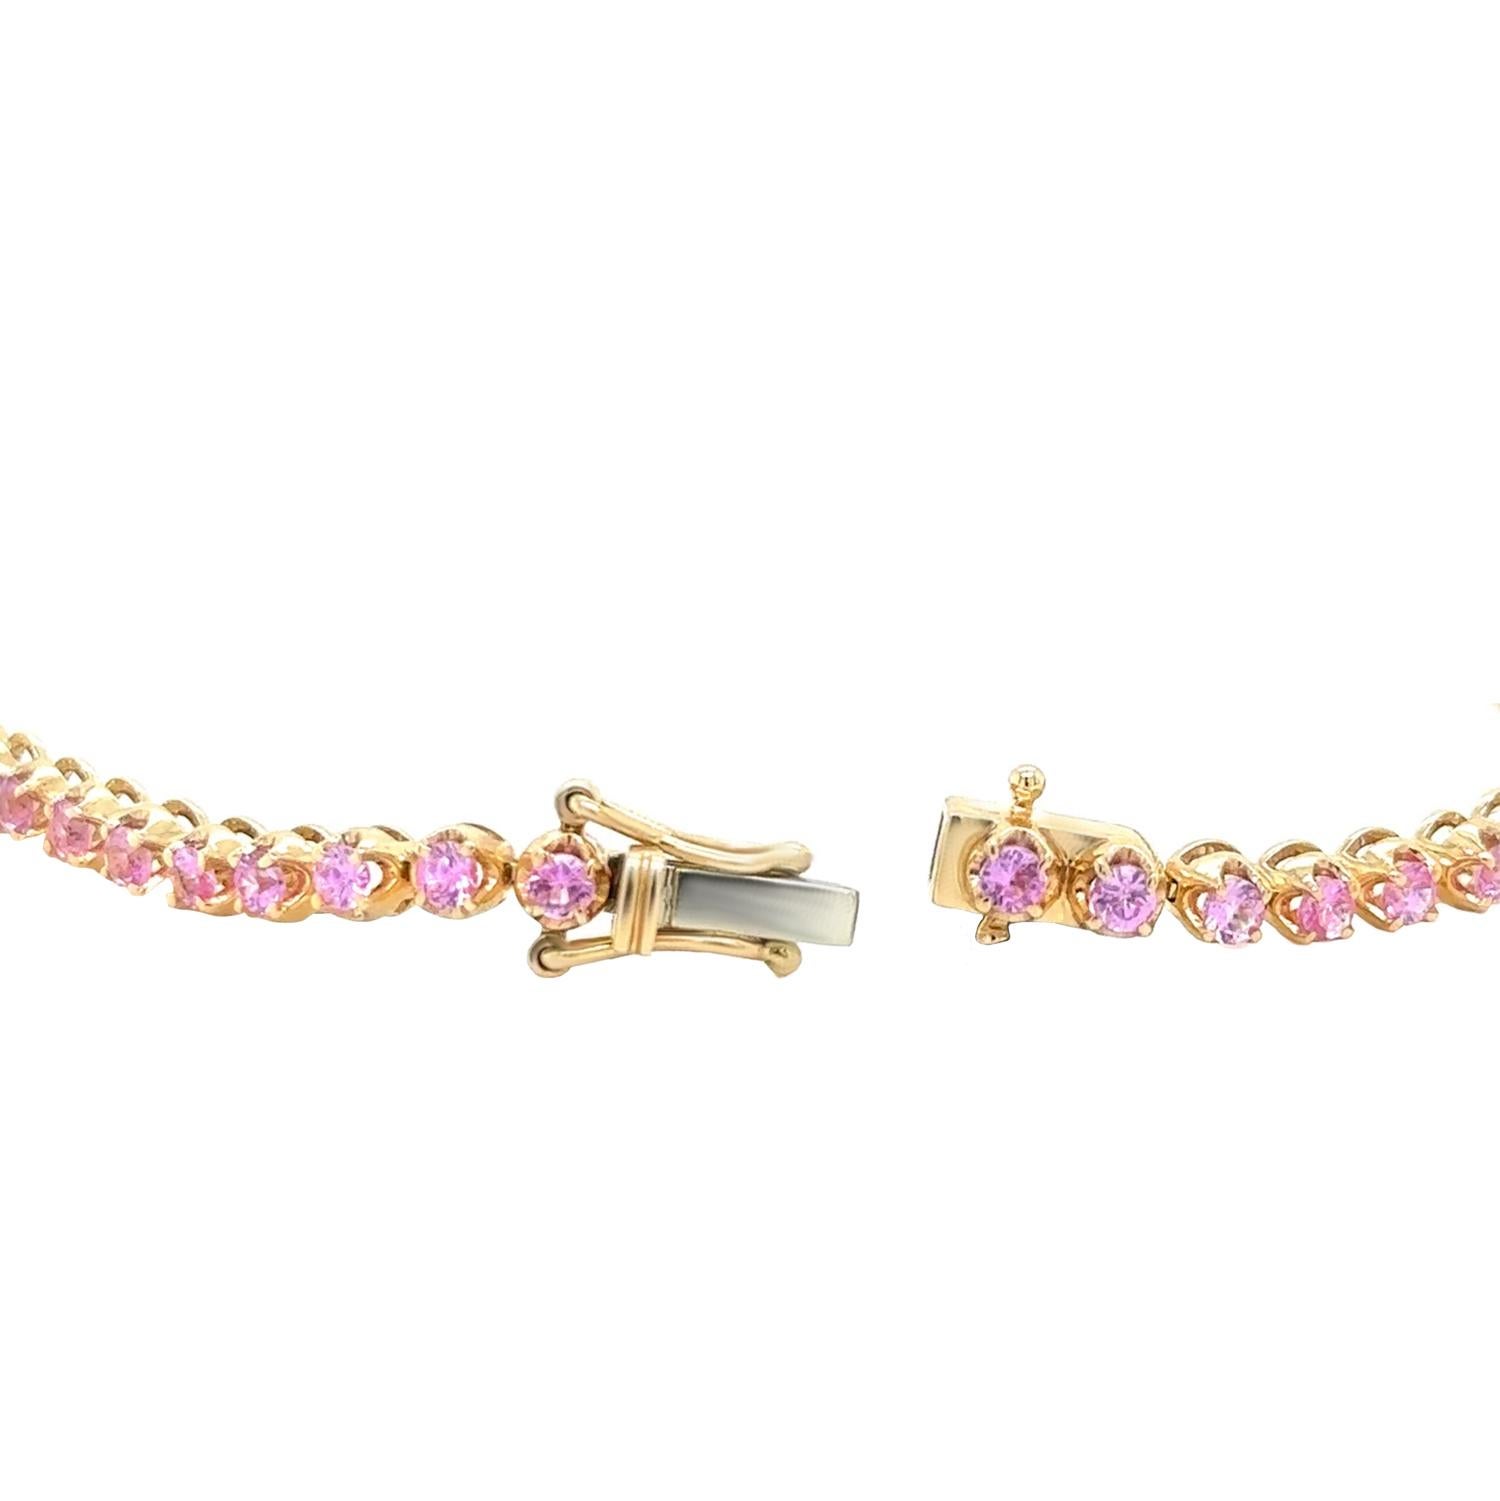 Round Cut Pink Sapphire Tennis Bracelet 2.89 Carats 14K Yellow Gold For Sale